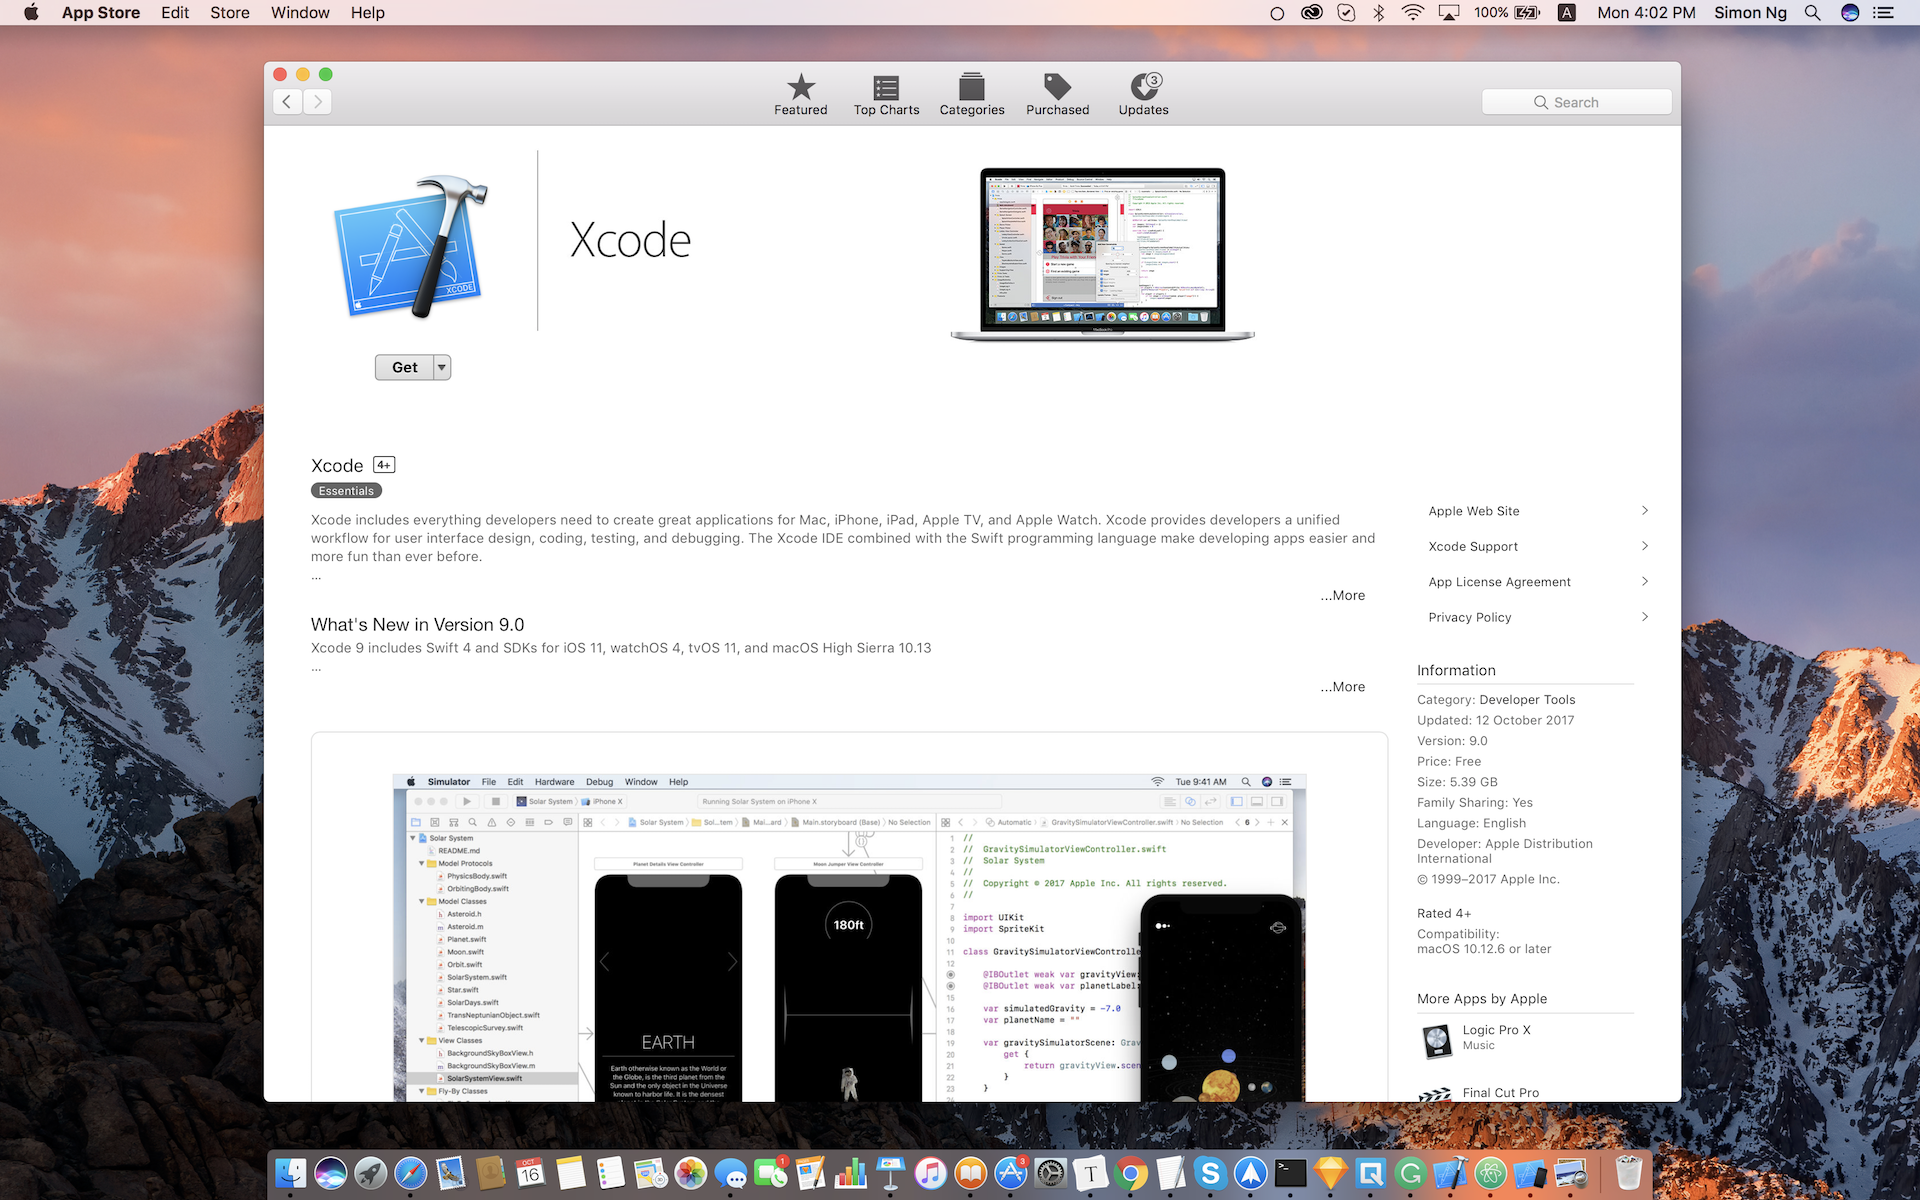 download xcode 7.3.1 on mac